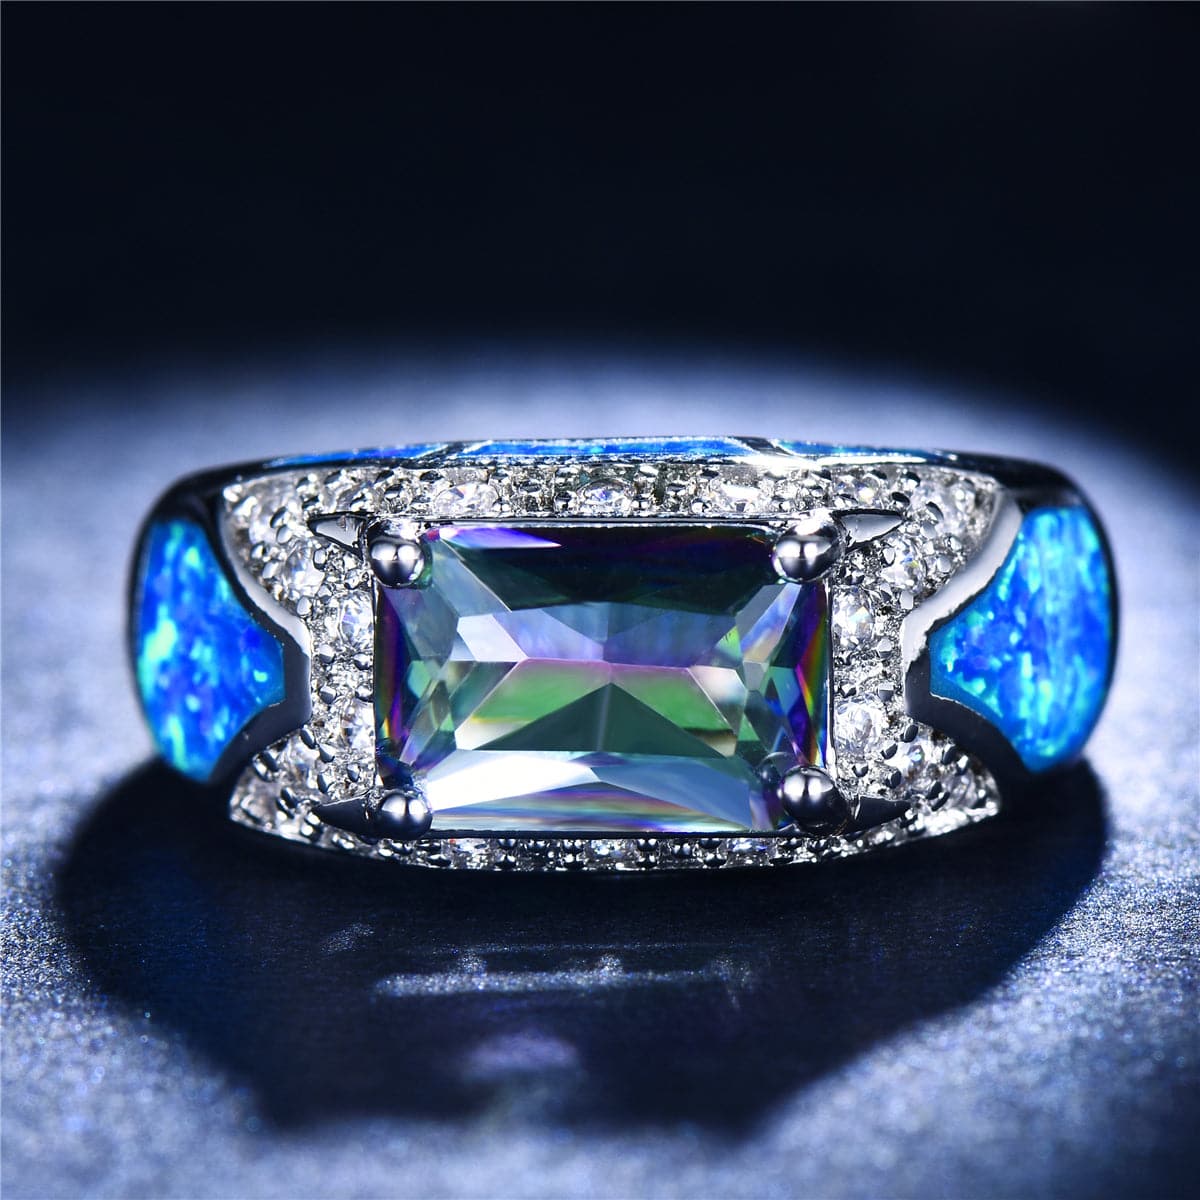 Blue Opal & Crystal Rectangle Ring